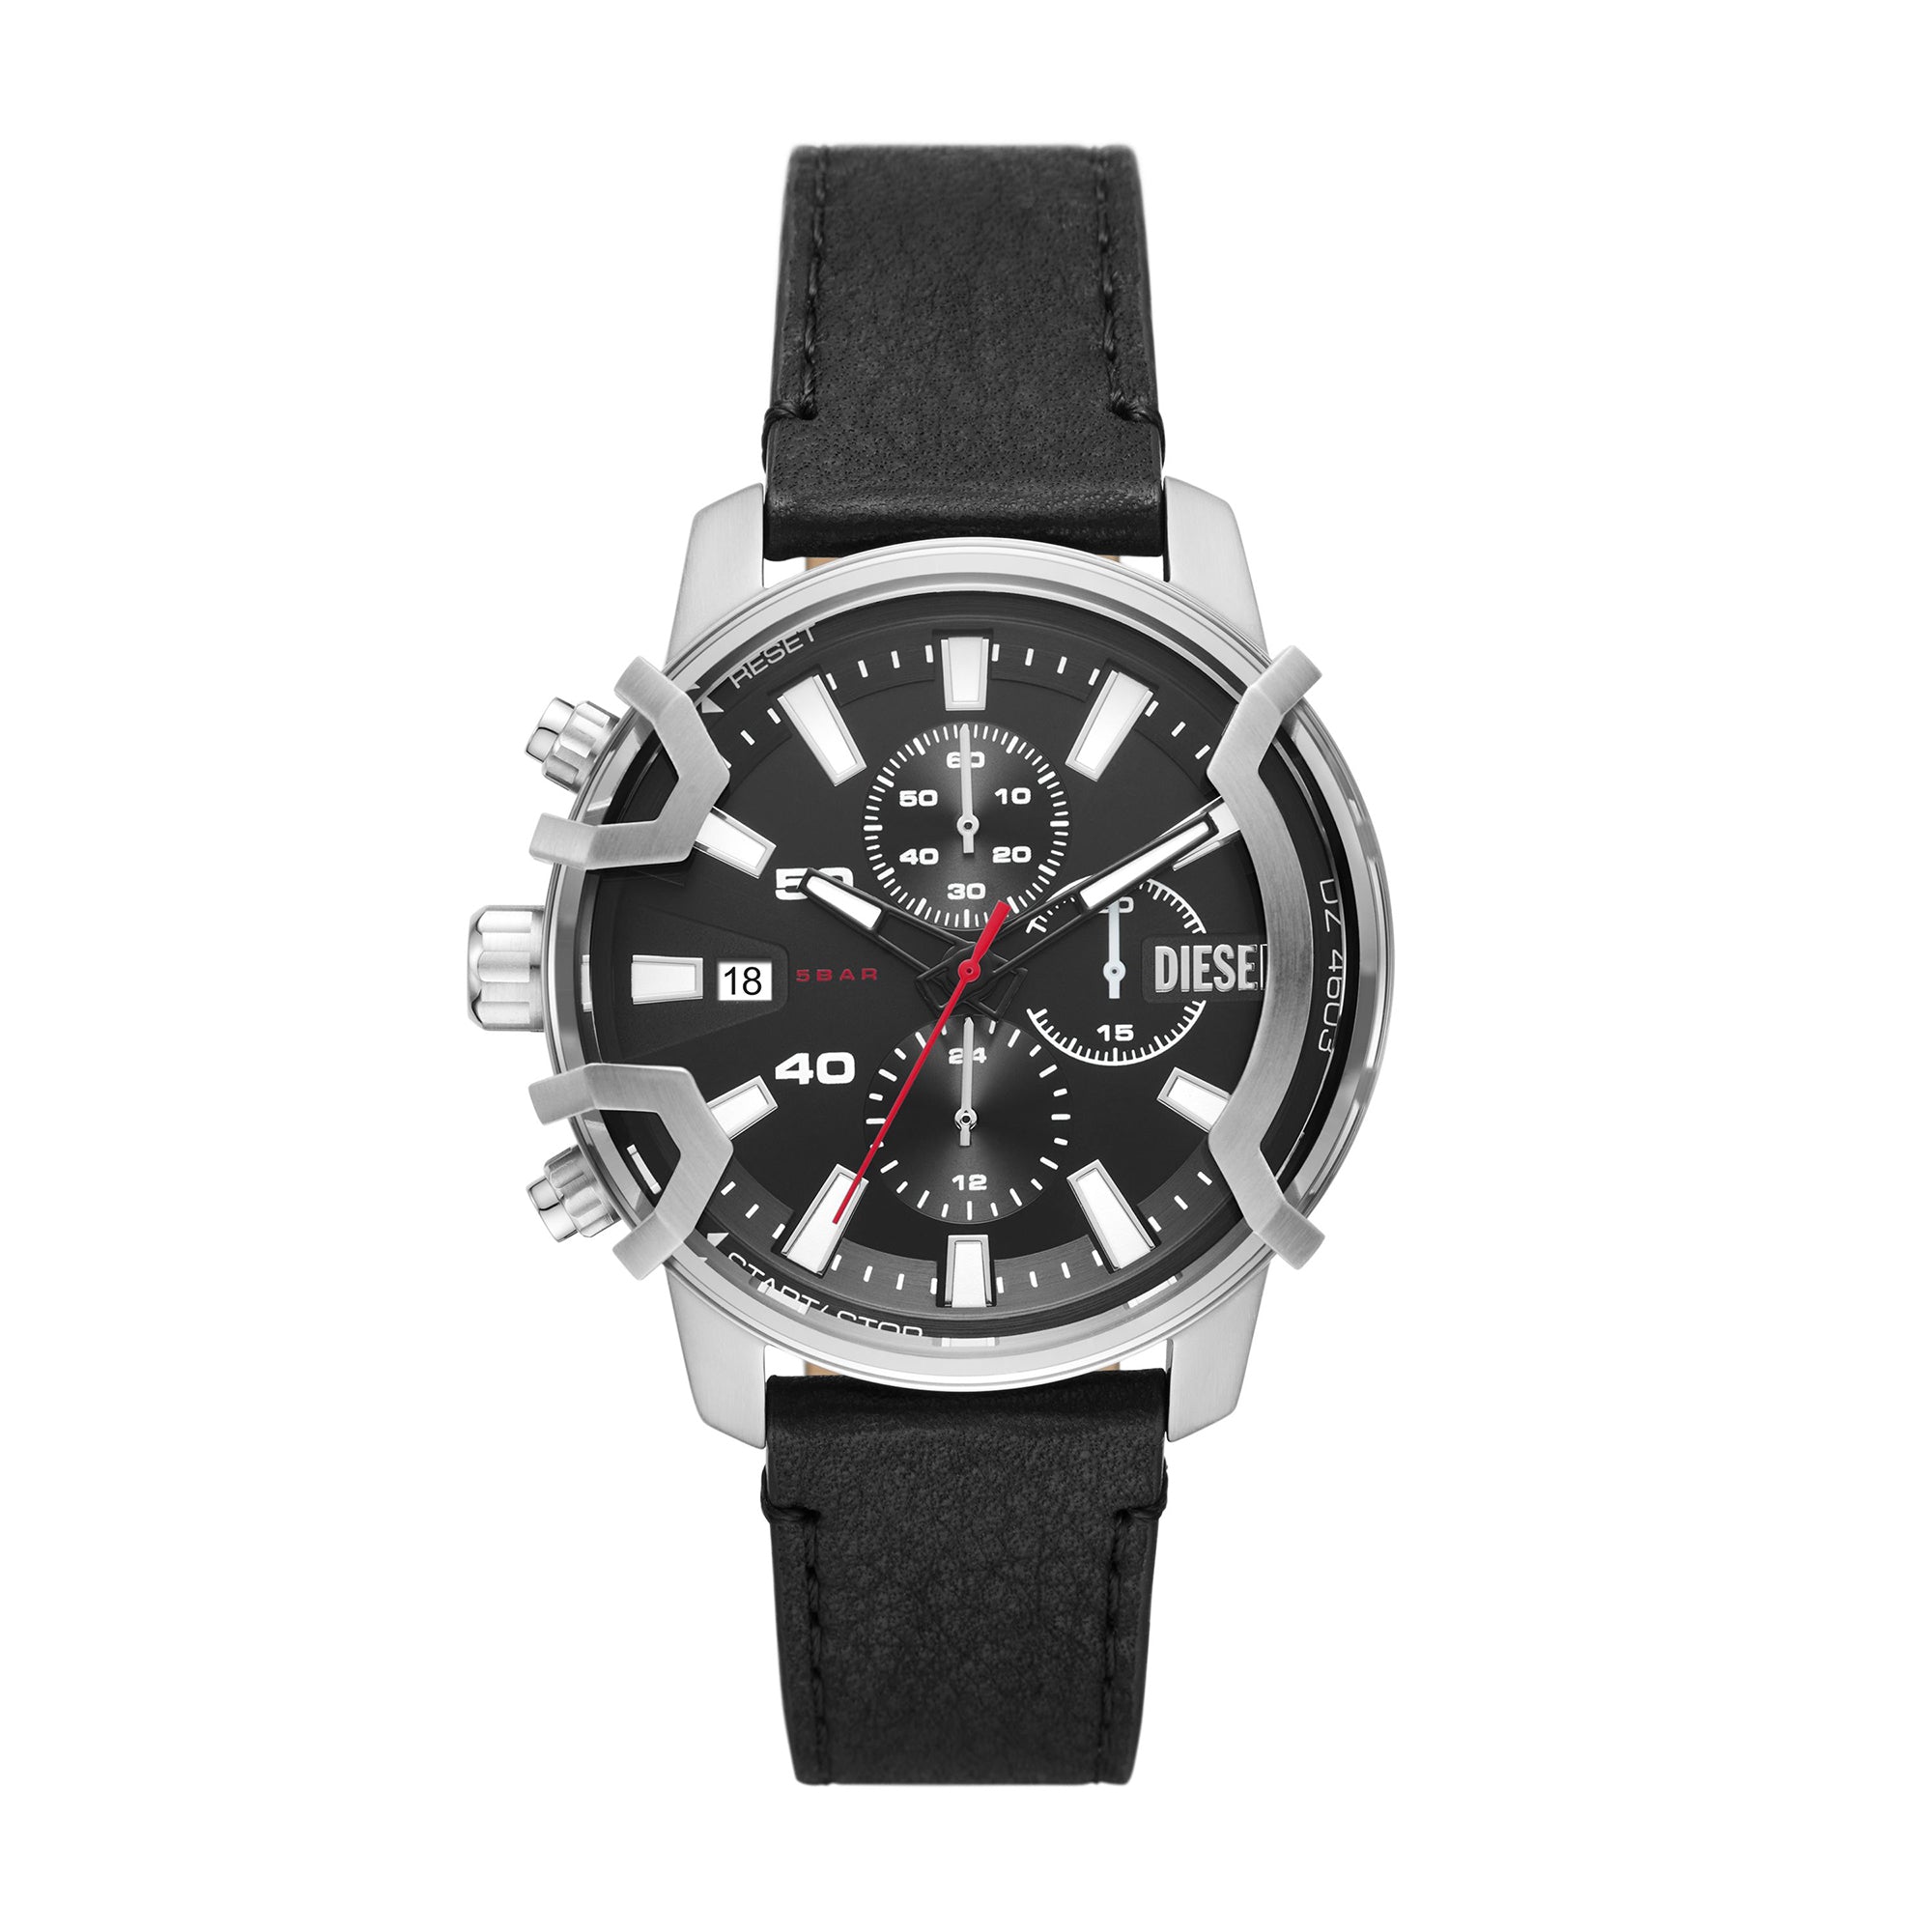 LEATHER Watch CLASSIC DIESEL M – House CHRONOGRAPH GRIFFED BLACK DIESEL The WATCHGRIFFED